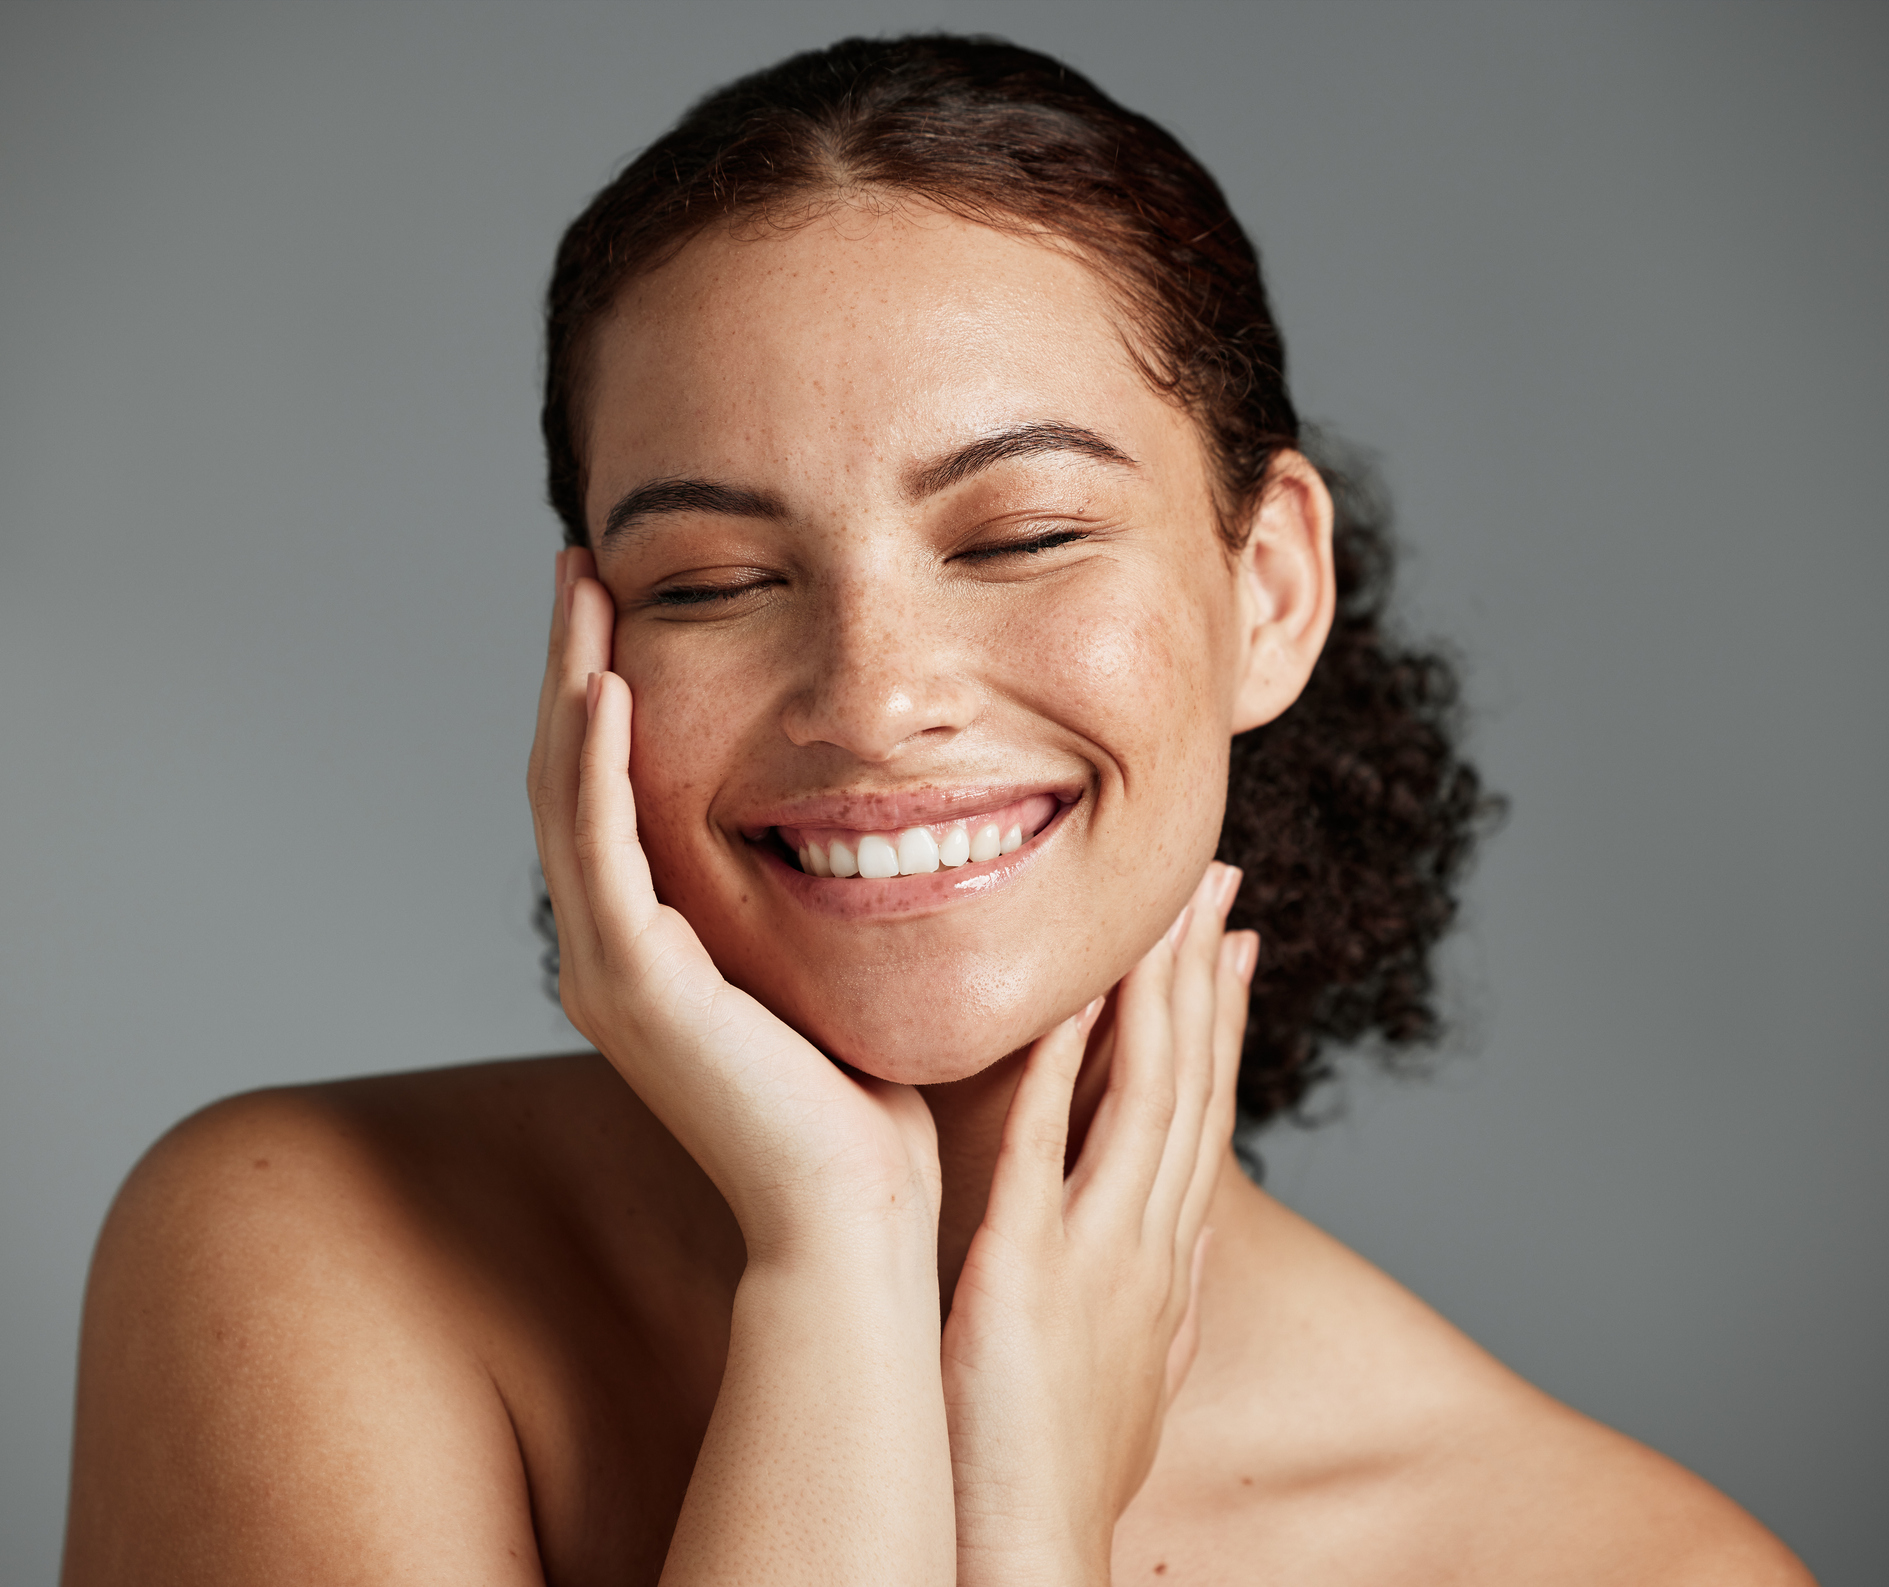 Bloom Facial Plastic Surgery Blog | BOTOX vs. Fillers: Better Understand Which Is Right for You